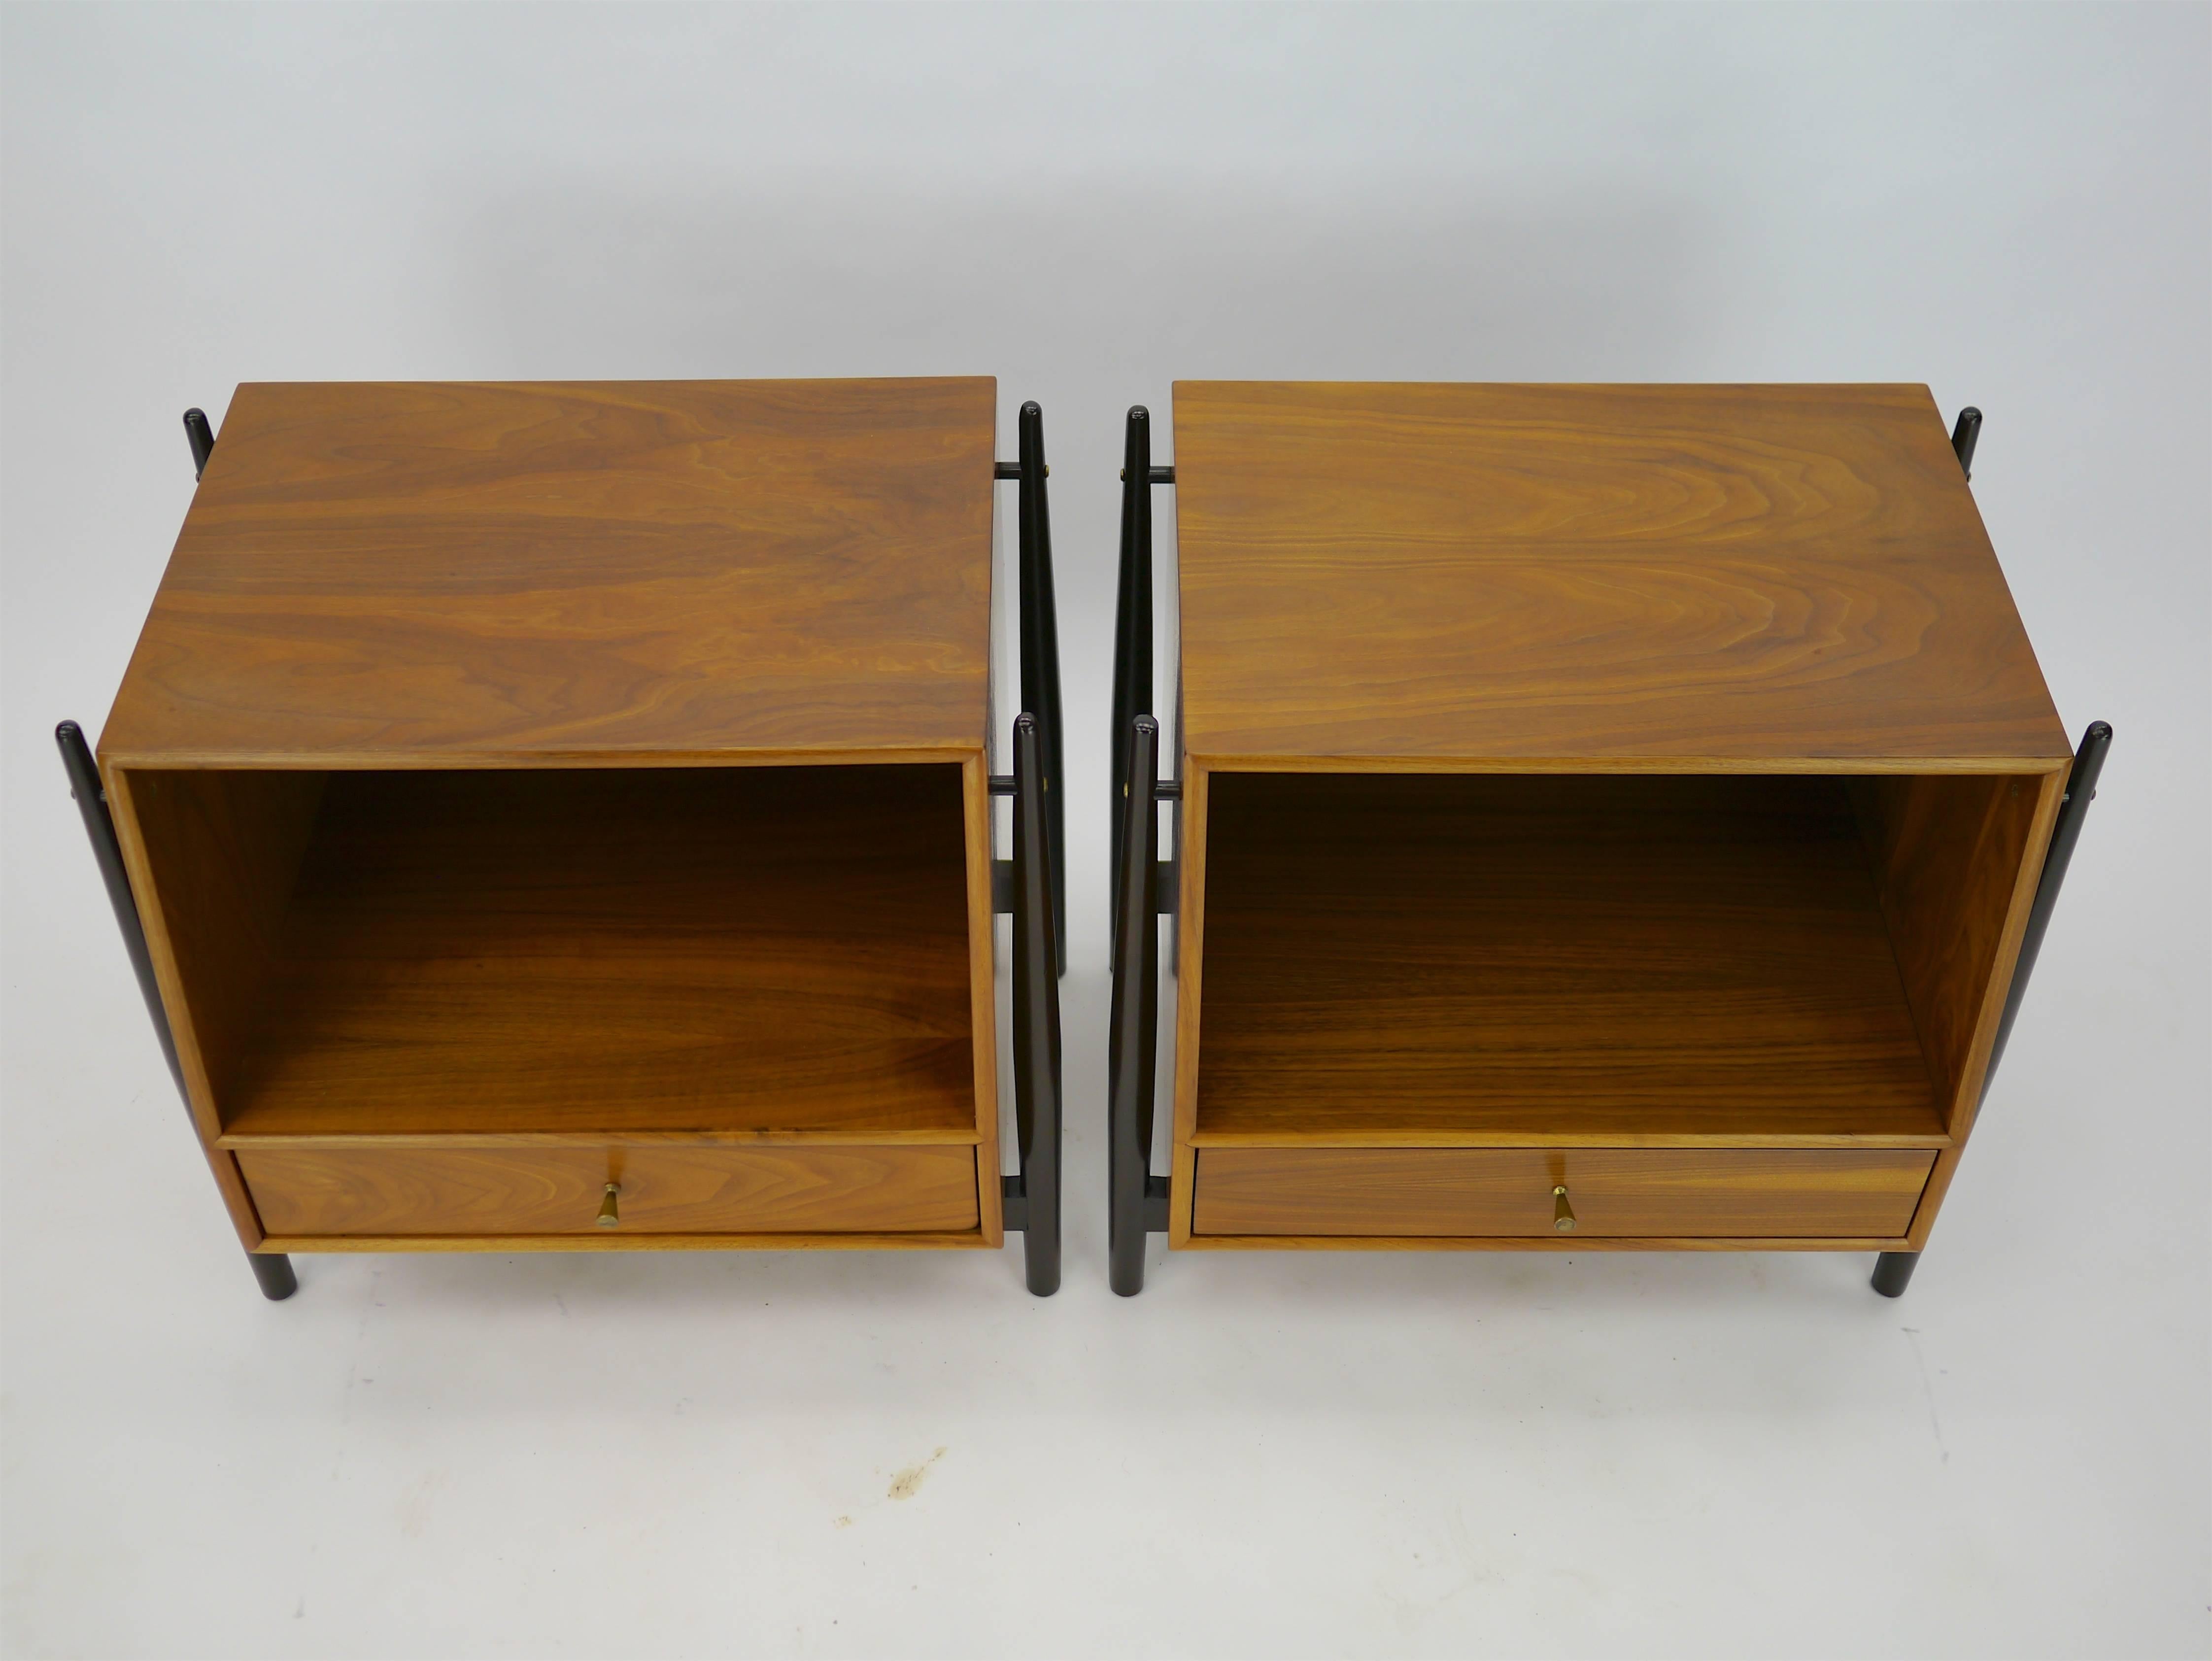 Nightstands in walnut by Kipp Stewart for Drexel. These nightstands have an exposed frame with a floating case piece. We borrowed the finish from Dunbar pieces of the period, the frames done in dark walnut, the cases left natural.